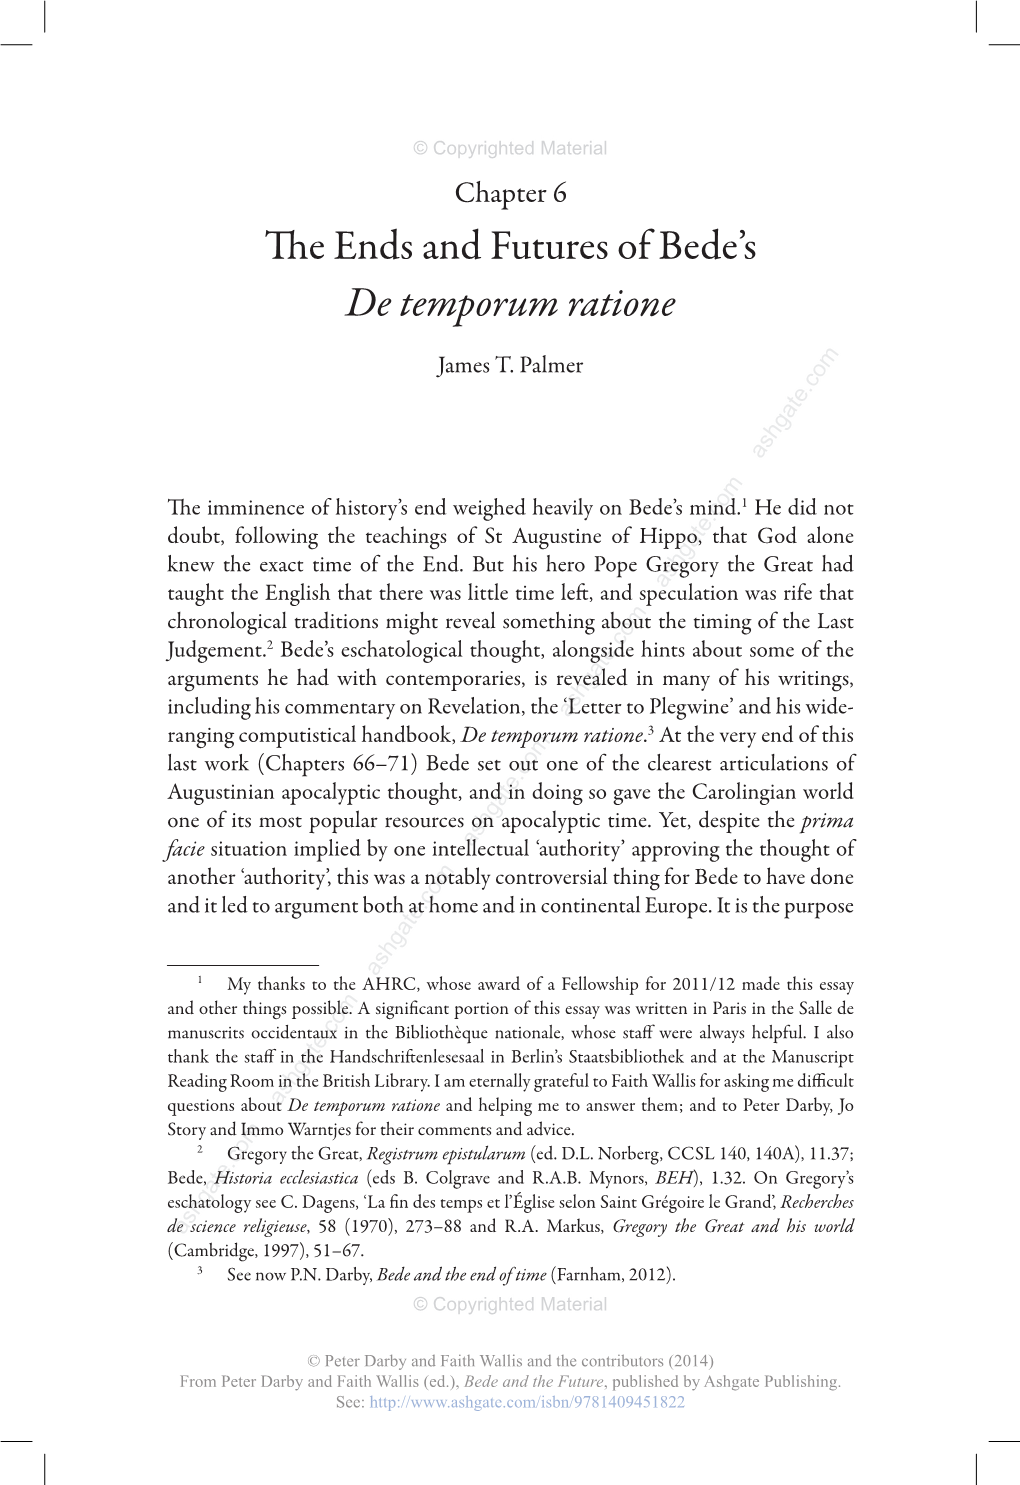 The Ends and Futures of Bede's De Temporum Ratione